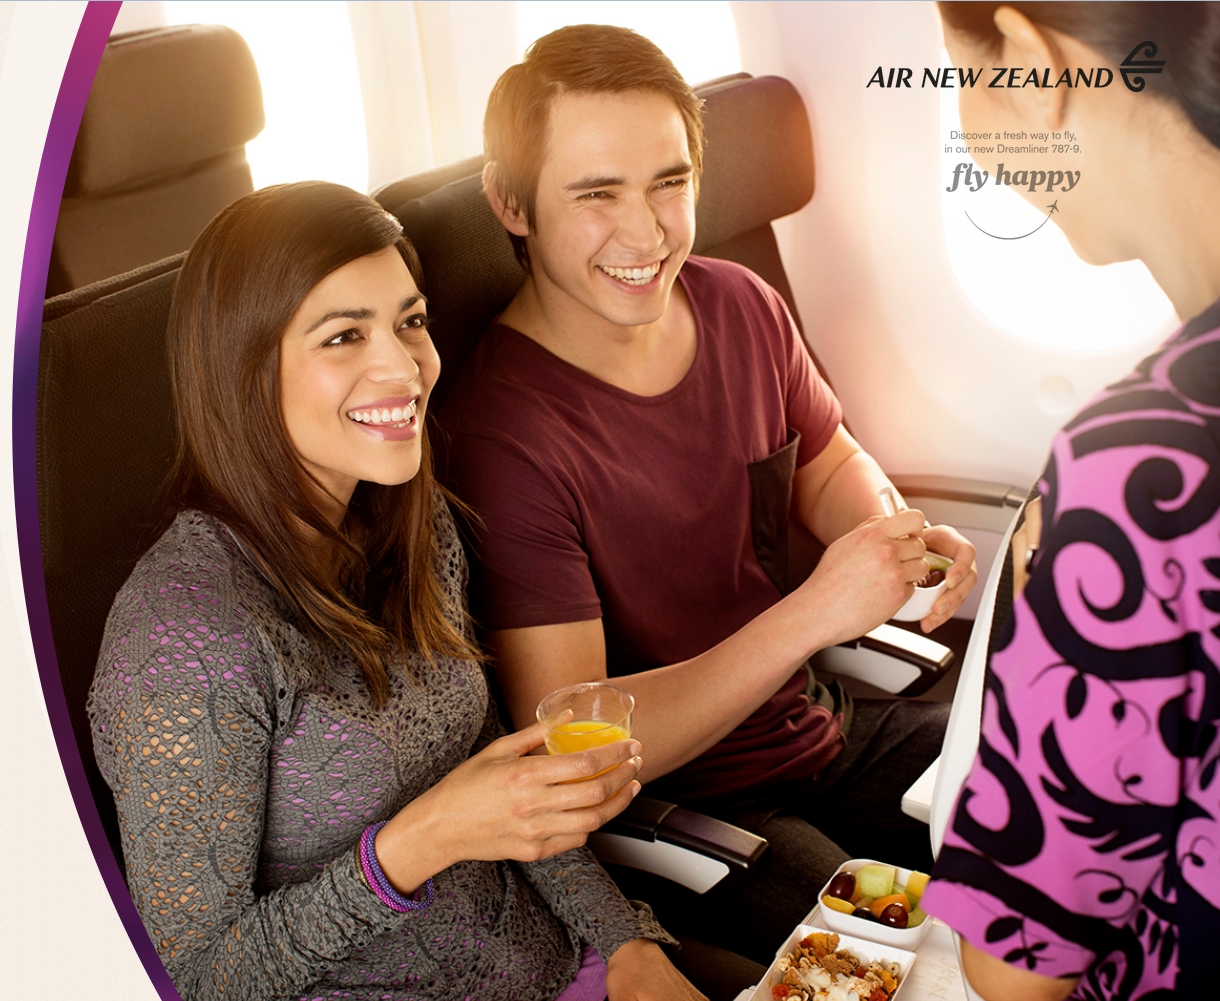 Air New Zealand – The happiest place in the sky